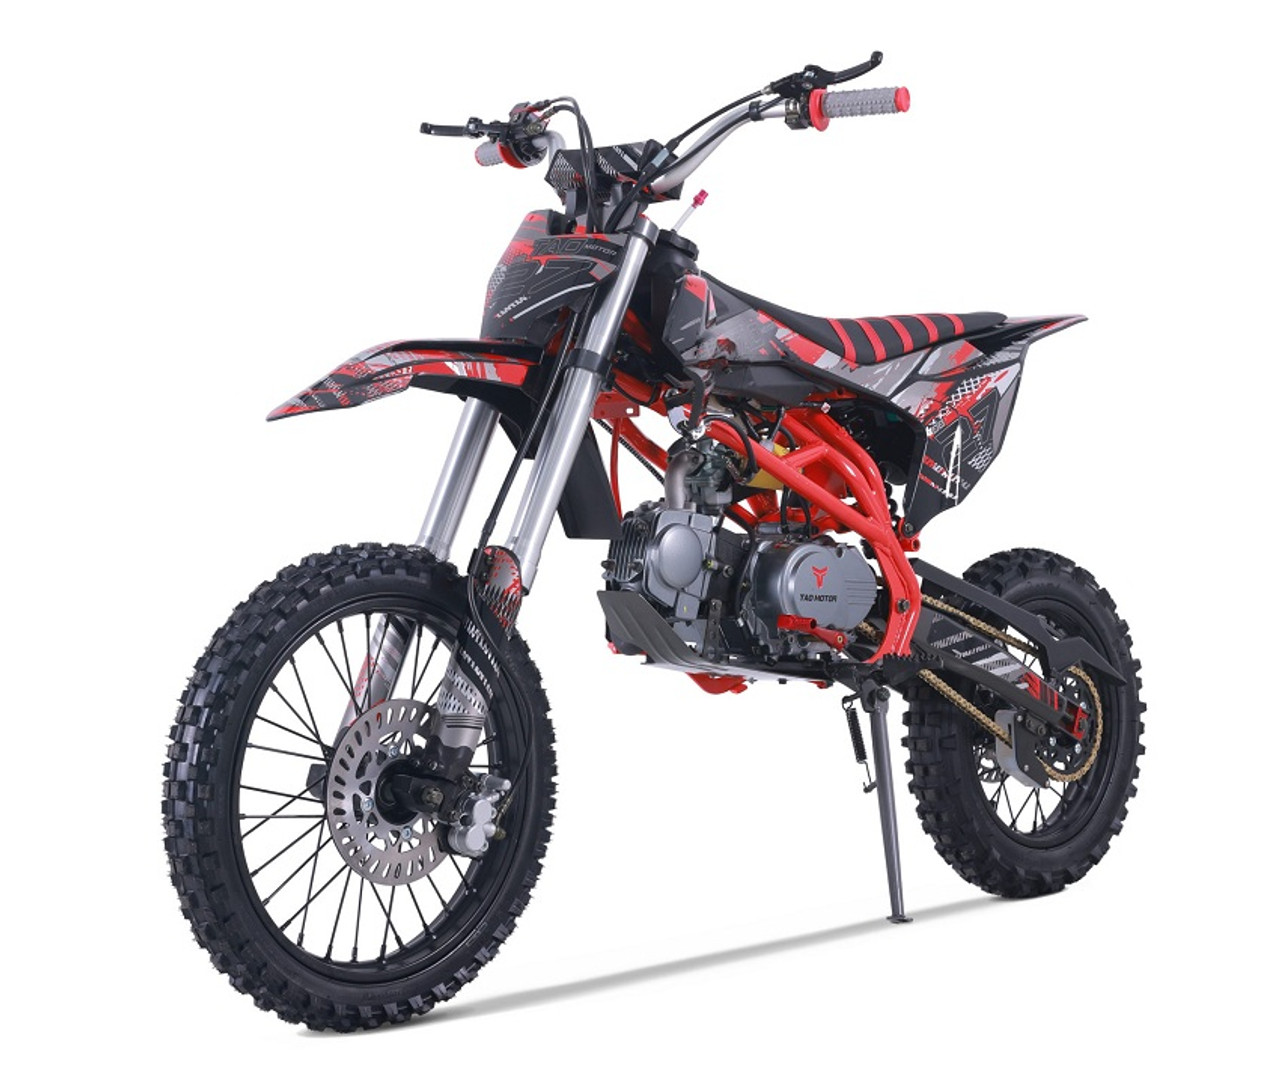 TaoTao DB27 125cc Off-Road Dirt Bike, Kick Start, Air Cooled, 4-Stroke, 1-Cylinder - Fully Assembled and Tested